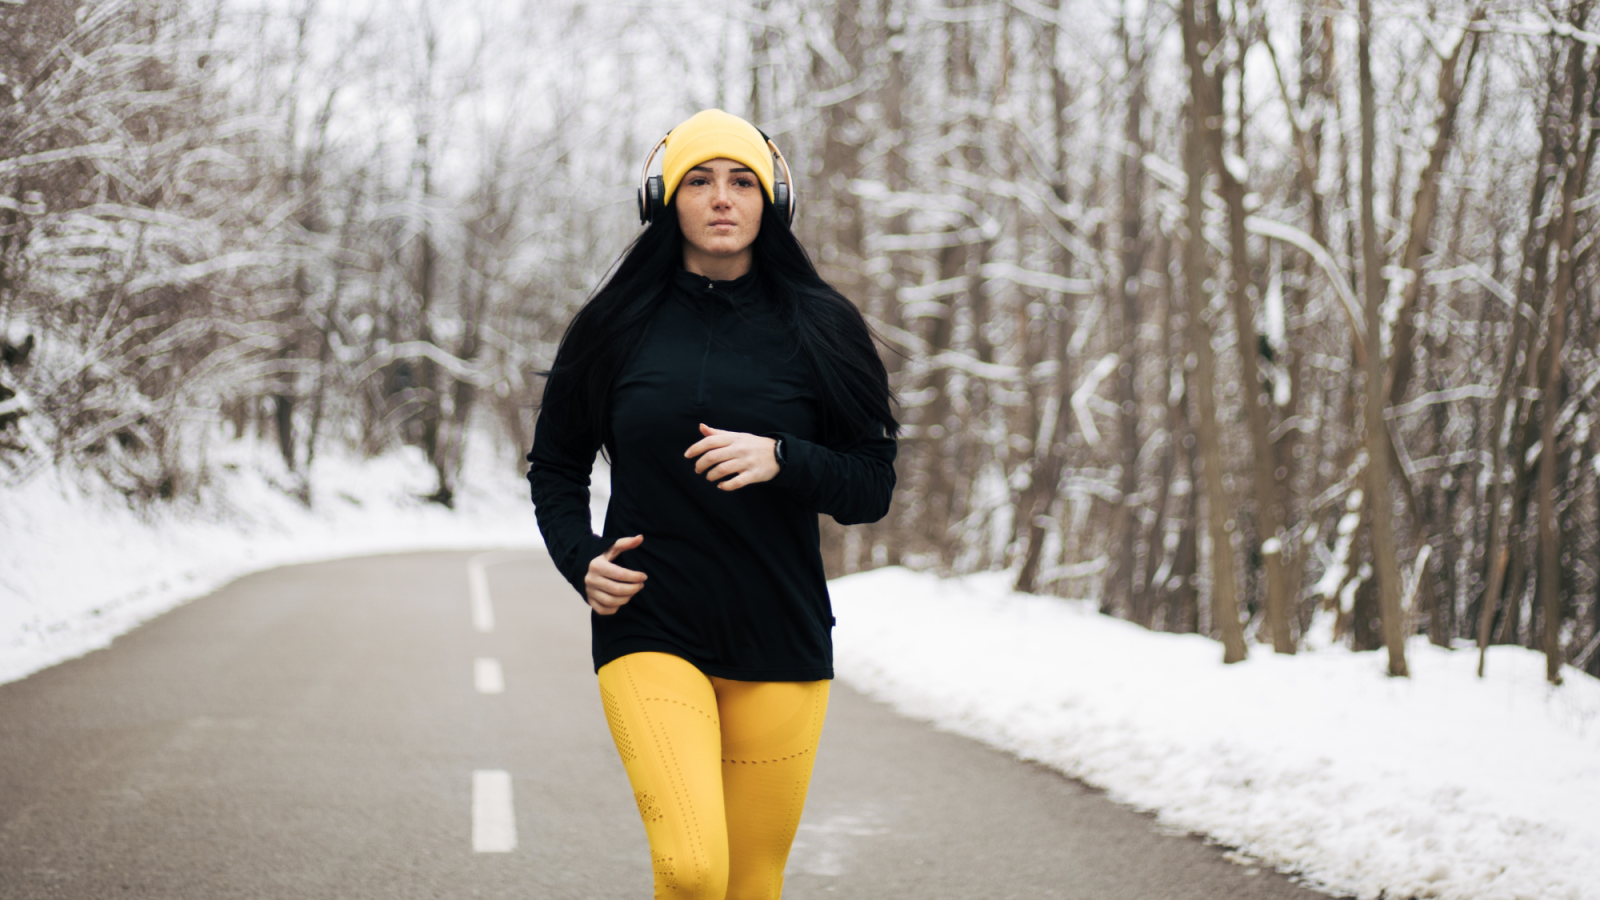 Women's Workout Leggings That Stand Up To Winter Elements